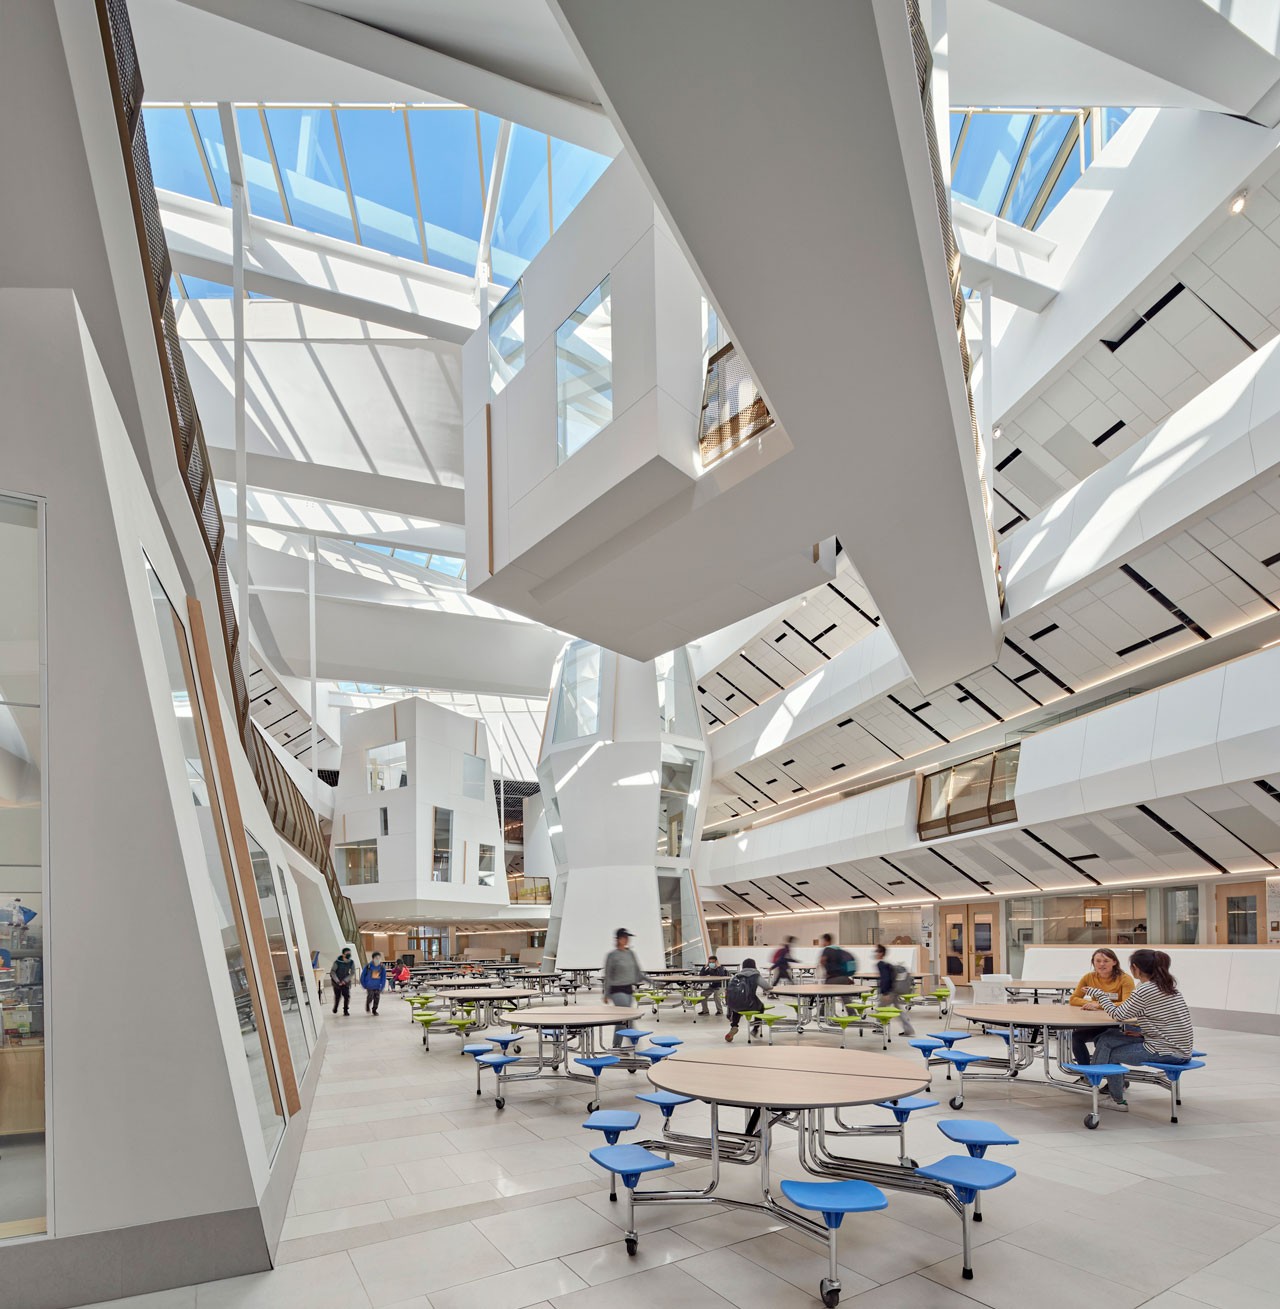 Ground level view of dining commons and daylighting at Fuller Middle School